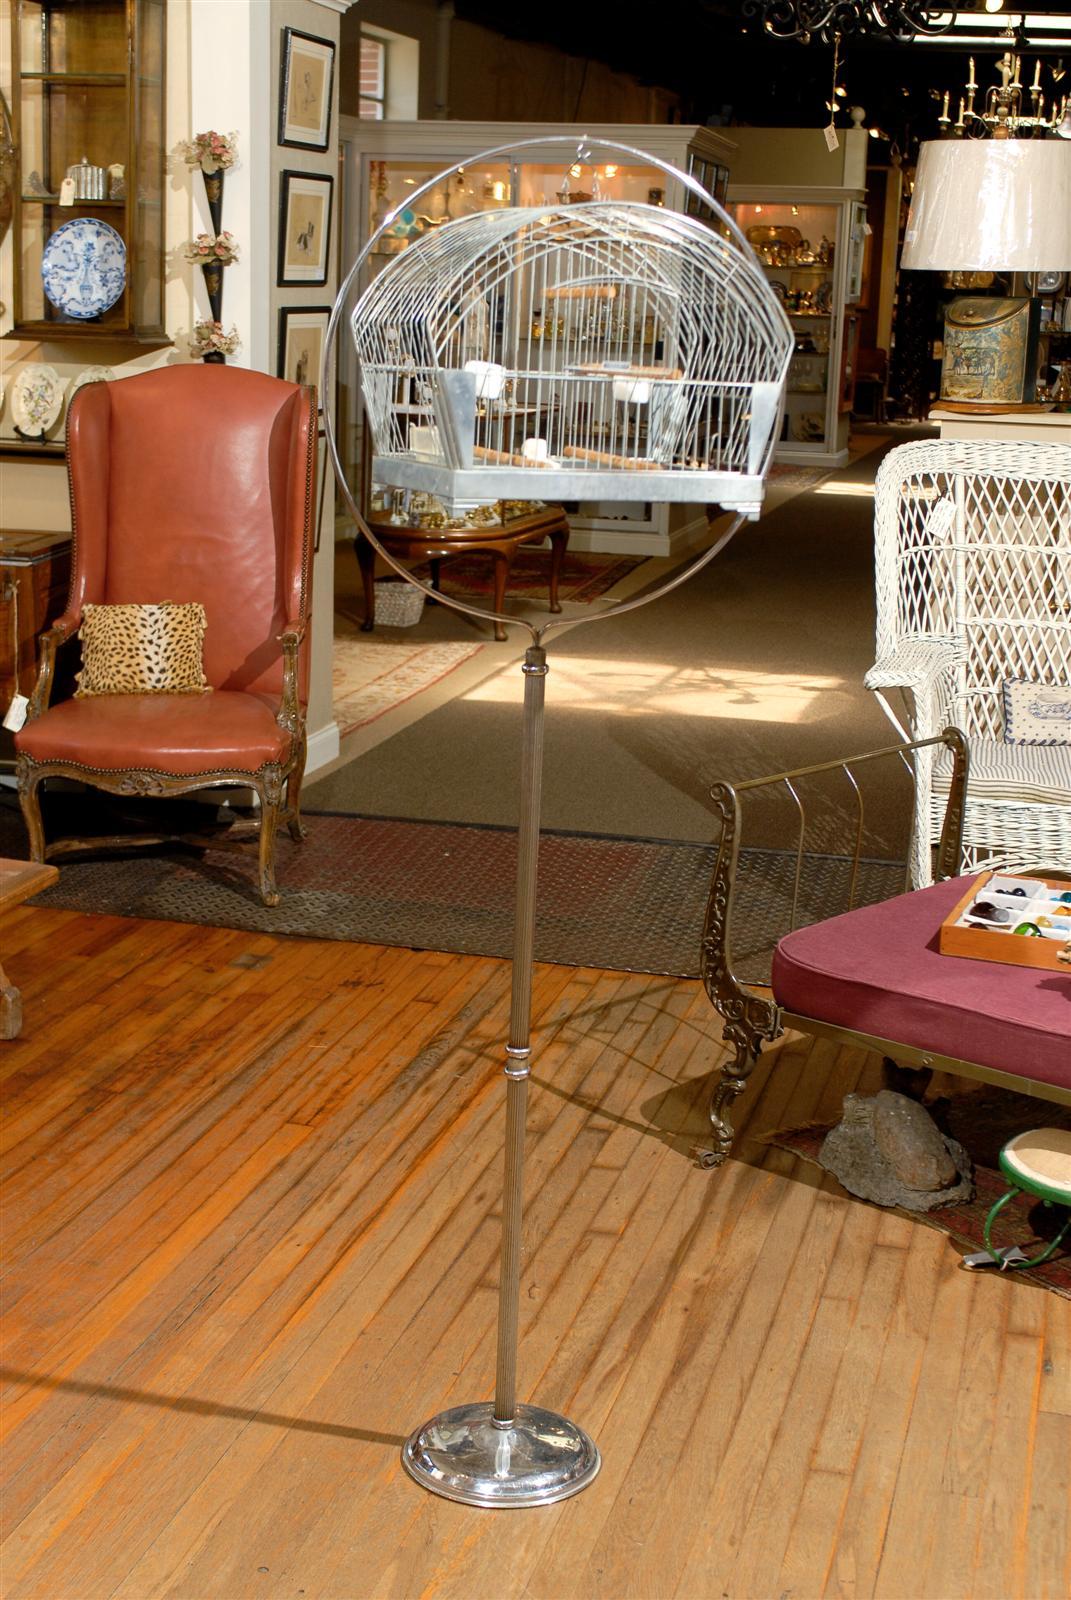 20th Century American chrome plated bird cage suspended from a hoop floor stand.  The bird cage was made by Hendryx during the Art Deco period and can be used with or without the stand.